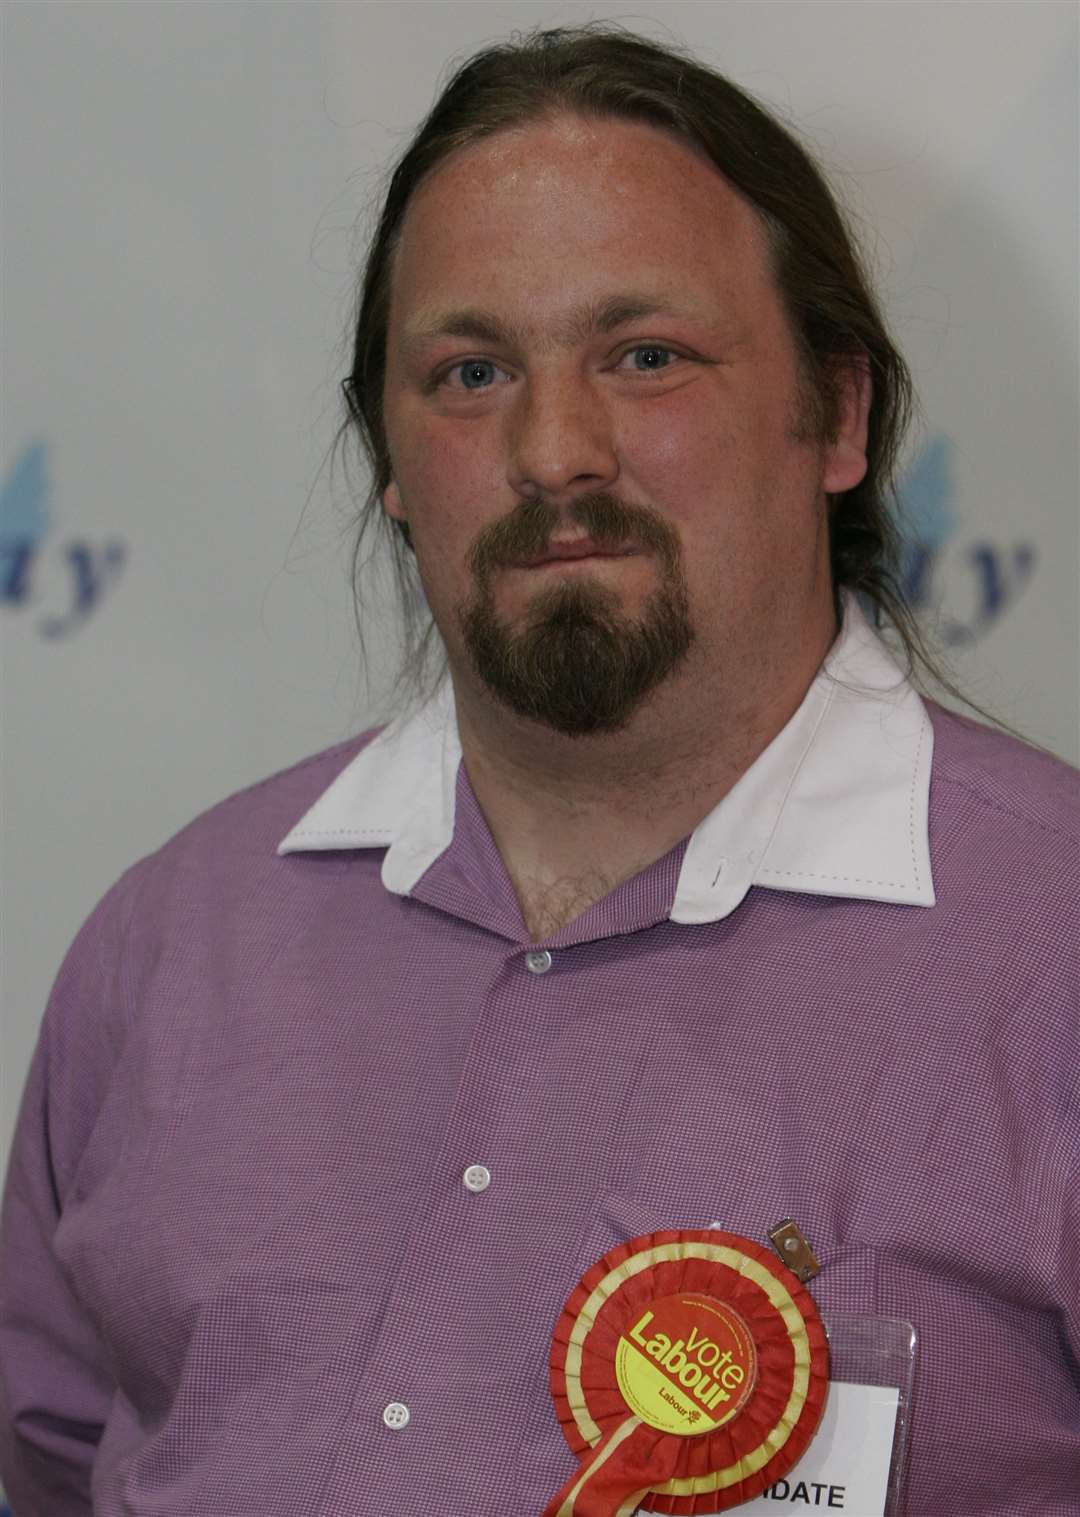 Newly-elected Vince Maple back in 2007